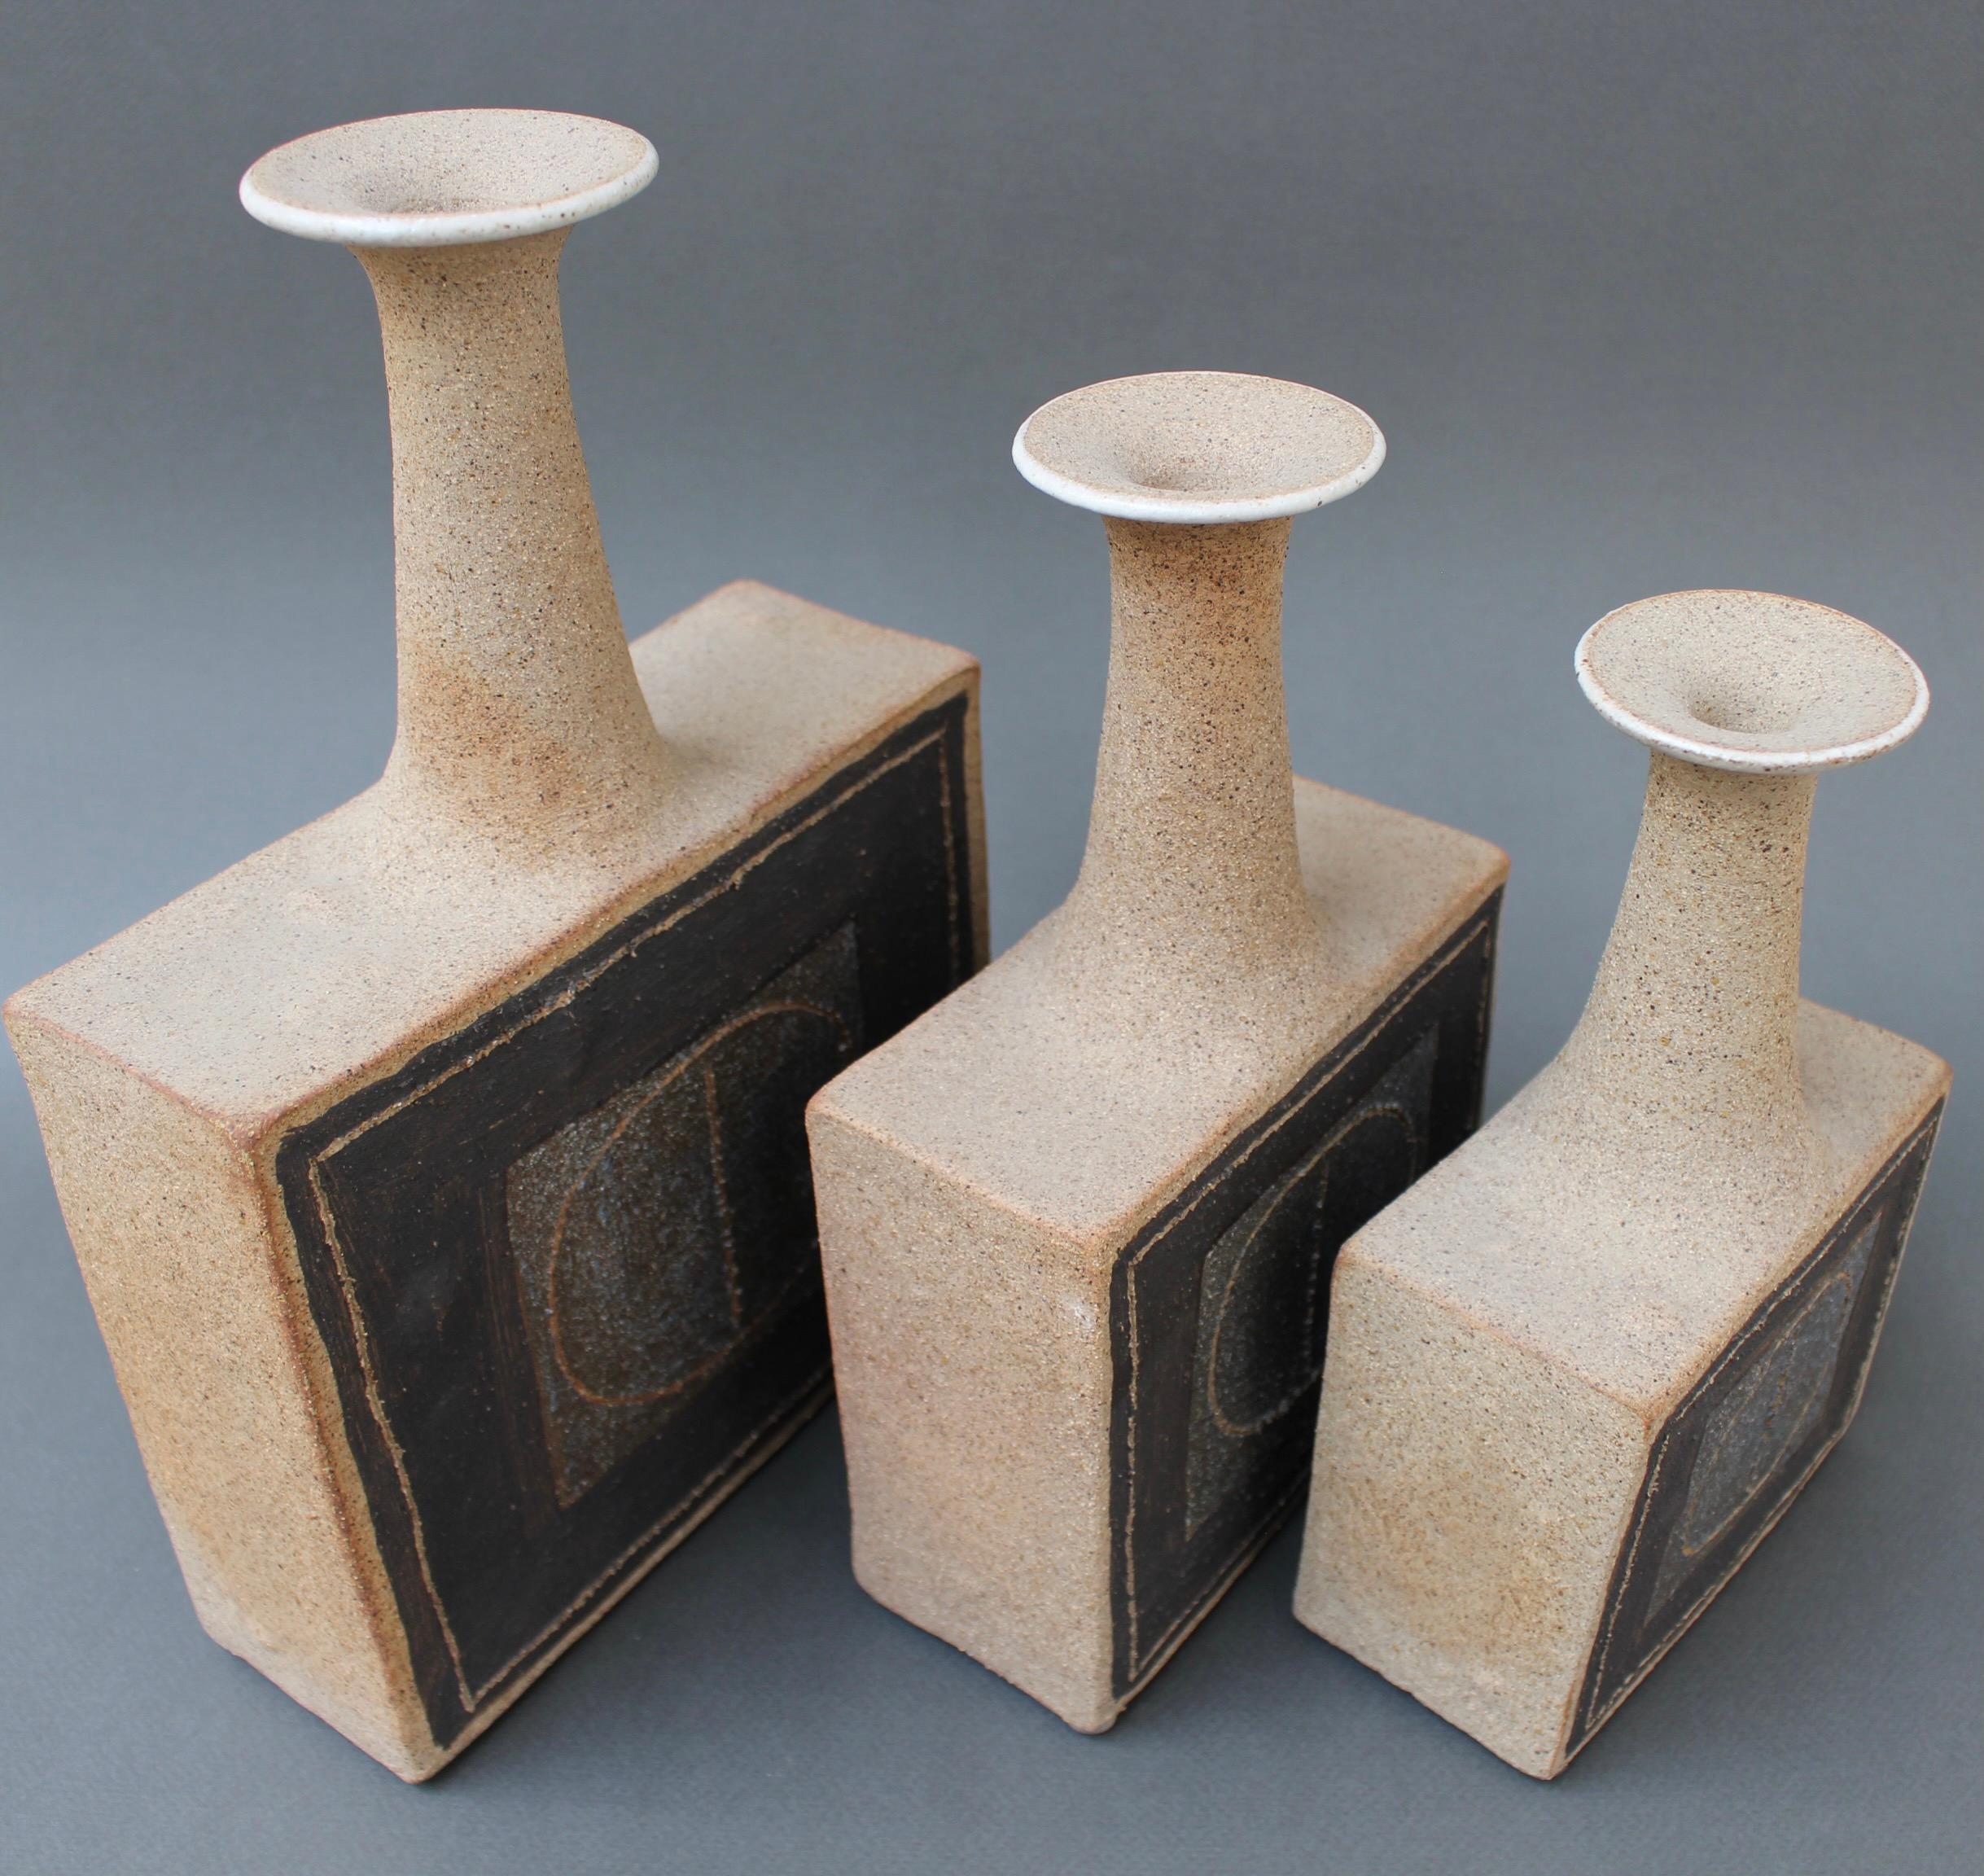 Trio of Italian Stoneware Vases with Abstract Motif by Bruno Gambone, c. 1990s For Sale 14